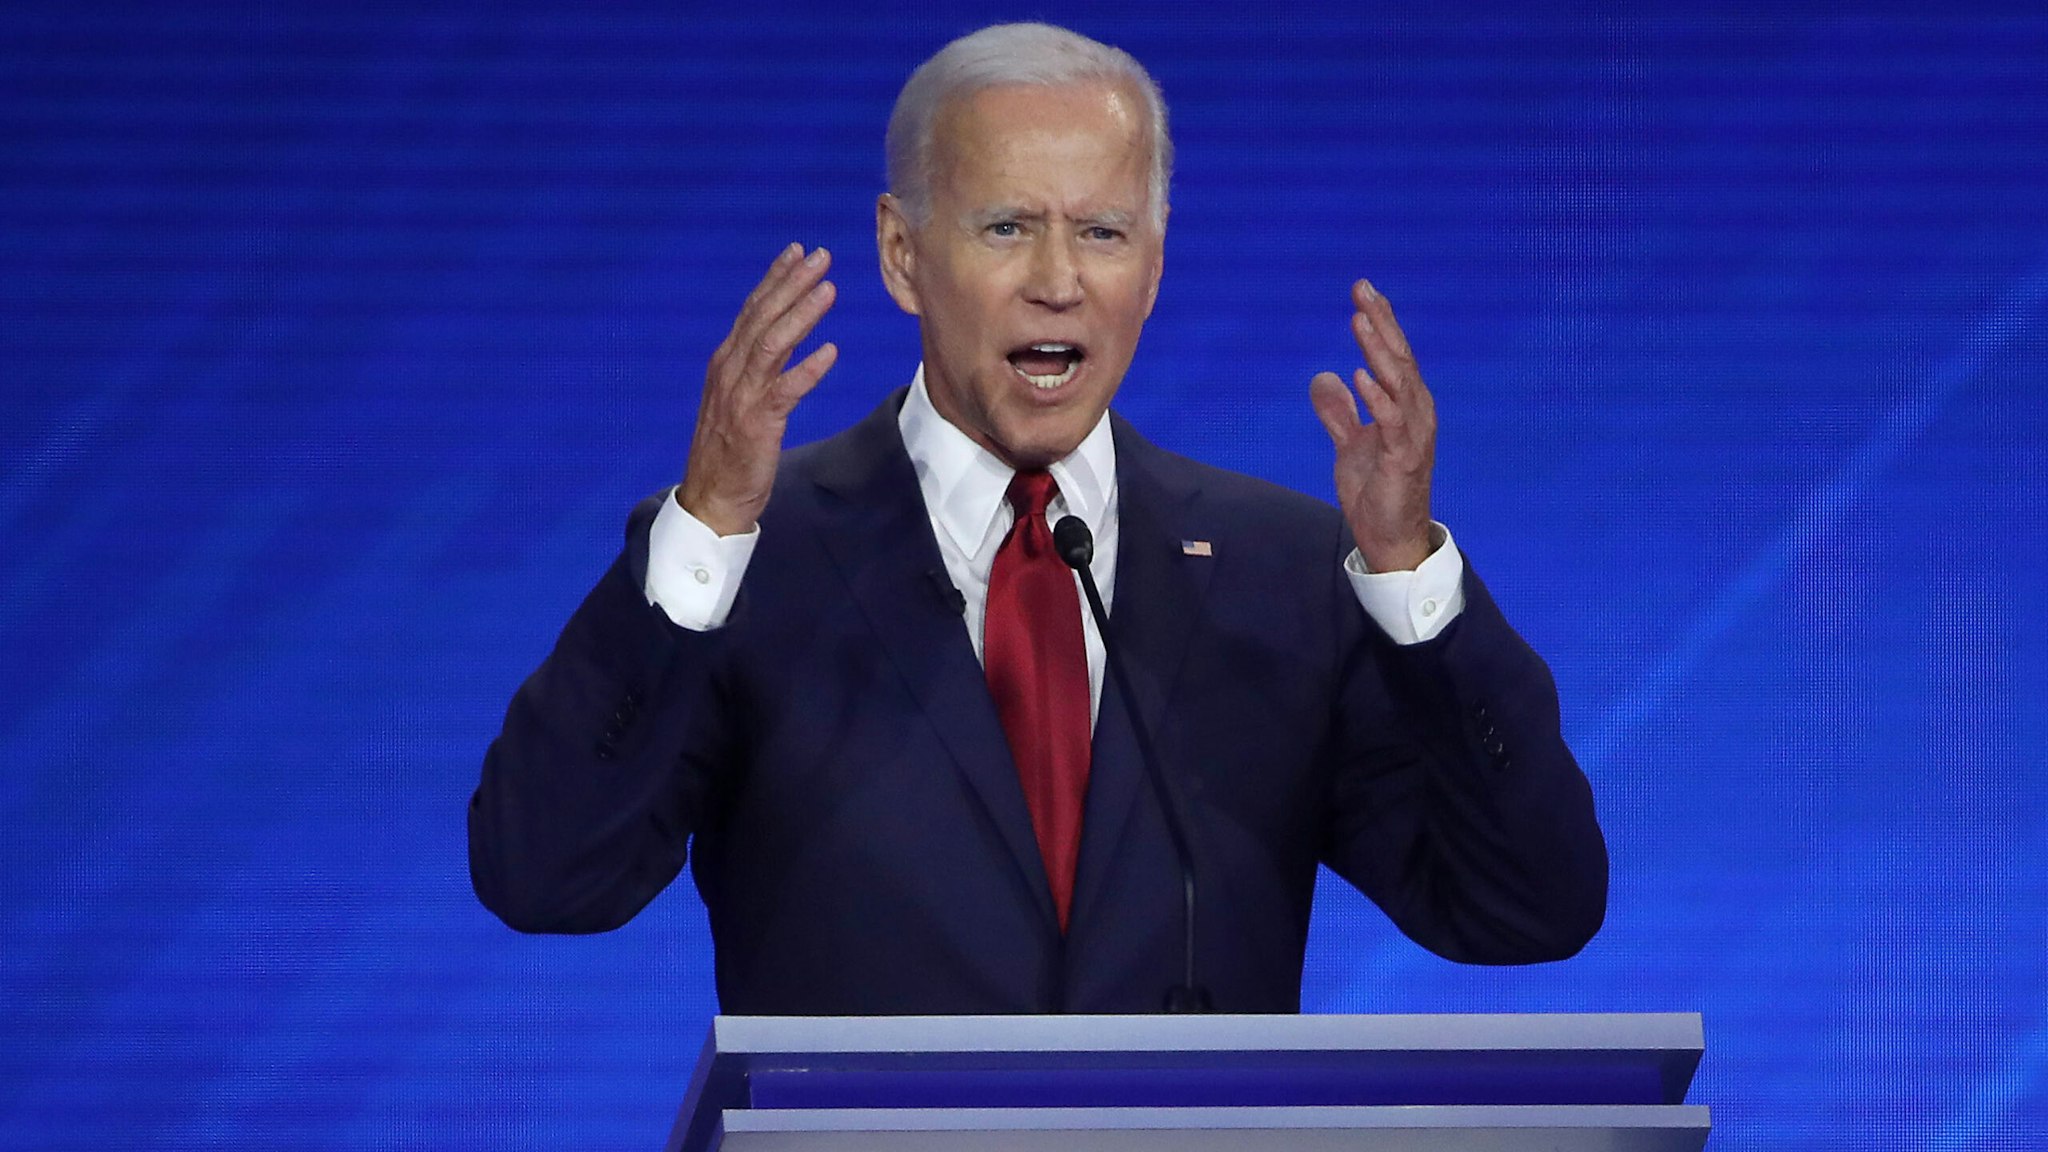 HOUSTON, TEXAS - SEPTEMBER 12: Democratic presidential candidate former Vice President Joe Biden speaks during the Democratic Presidential Debate at Texas Southern University's Health and PE Center on September 12, 2019 in Houston, Texas. Ten Democratic presidential hopefuls were chosen from the larger field of candidates to participate in the debate hosted by ABC News in partnership with Univision.